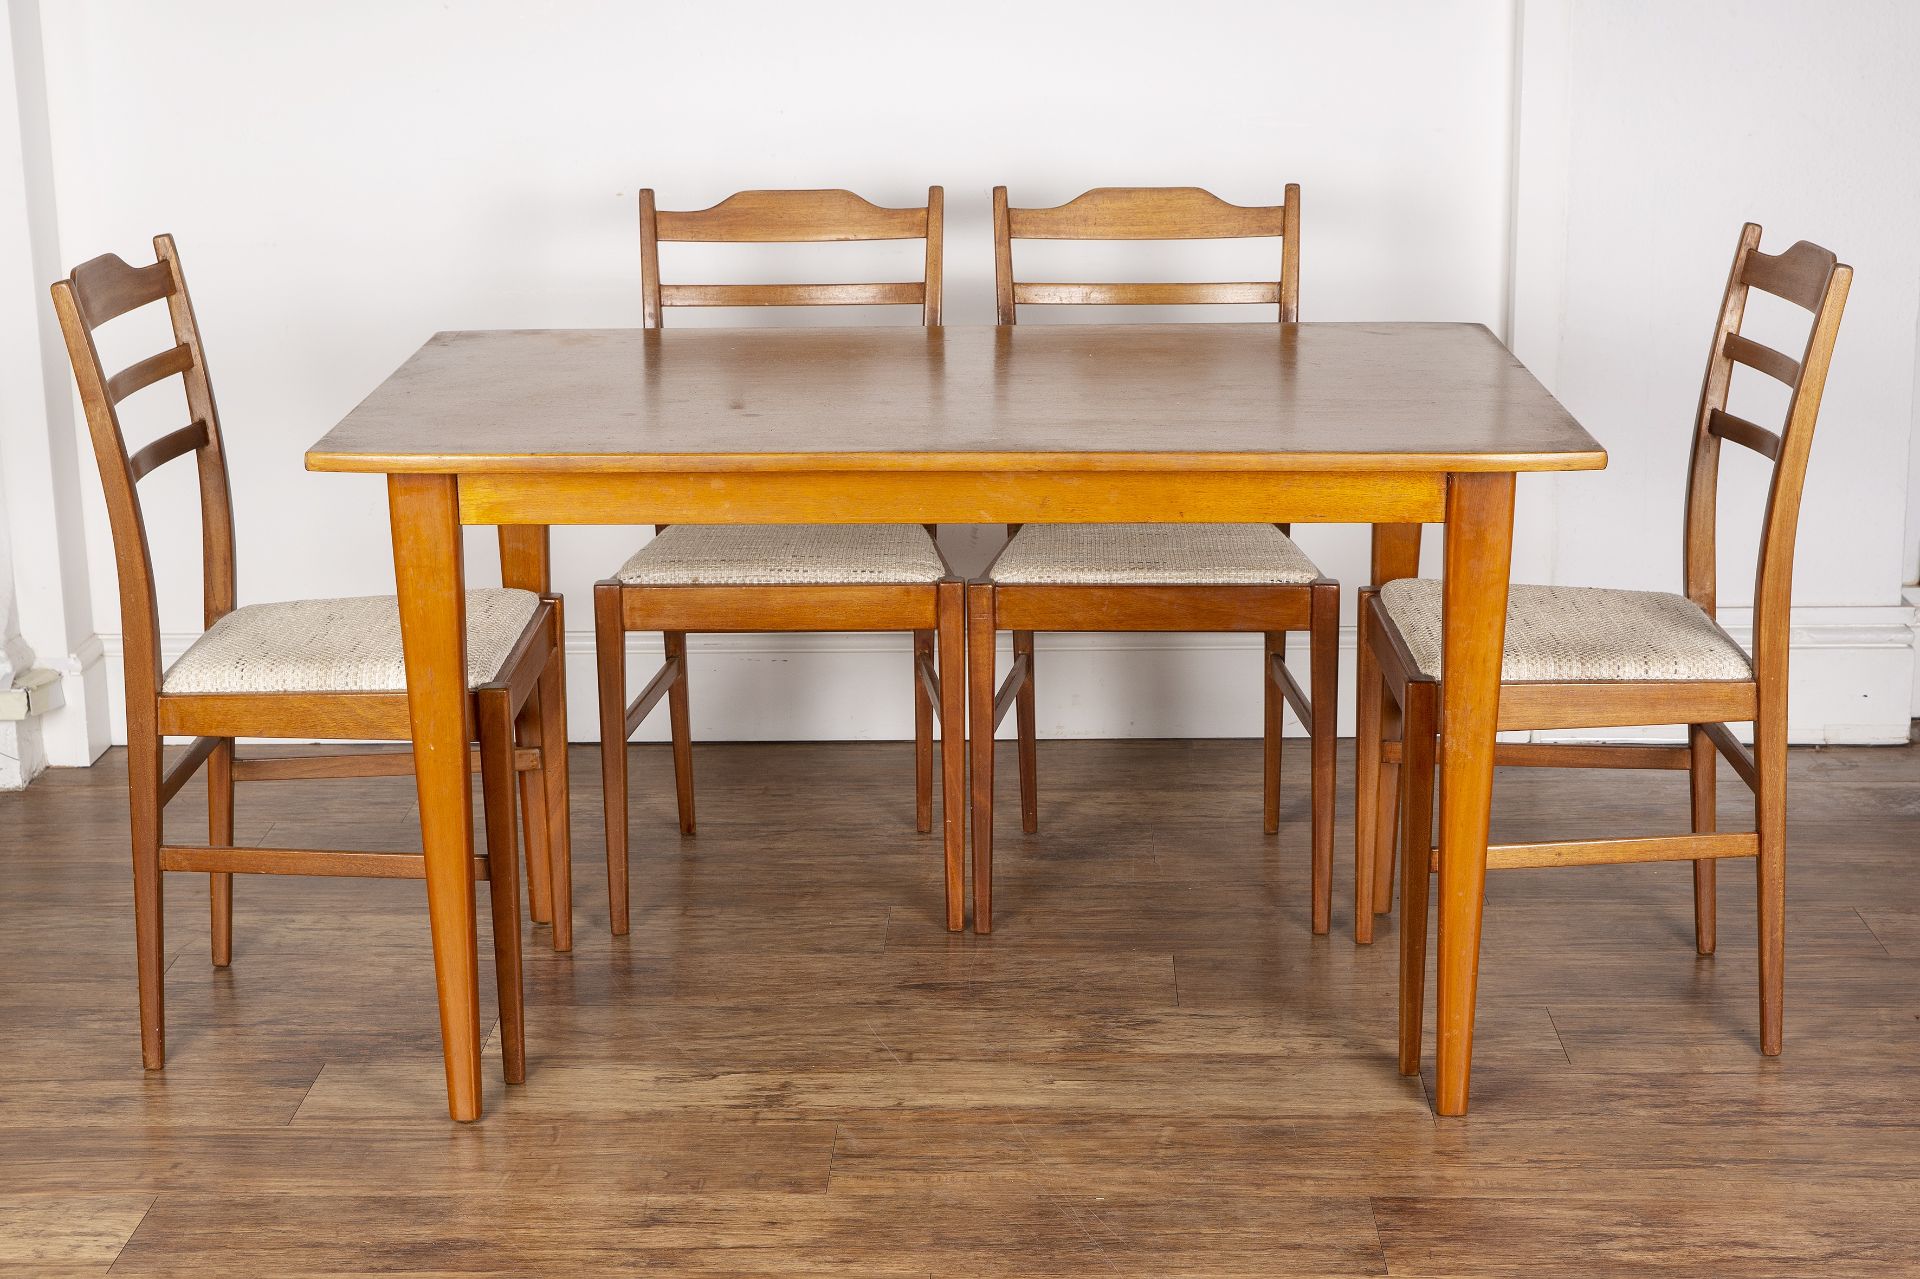 Gordon Russell of Broadway teak dining table and set of four chairs, the table with an applied label